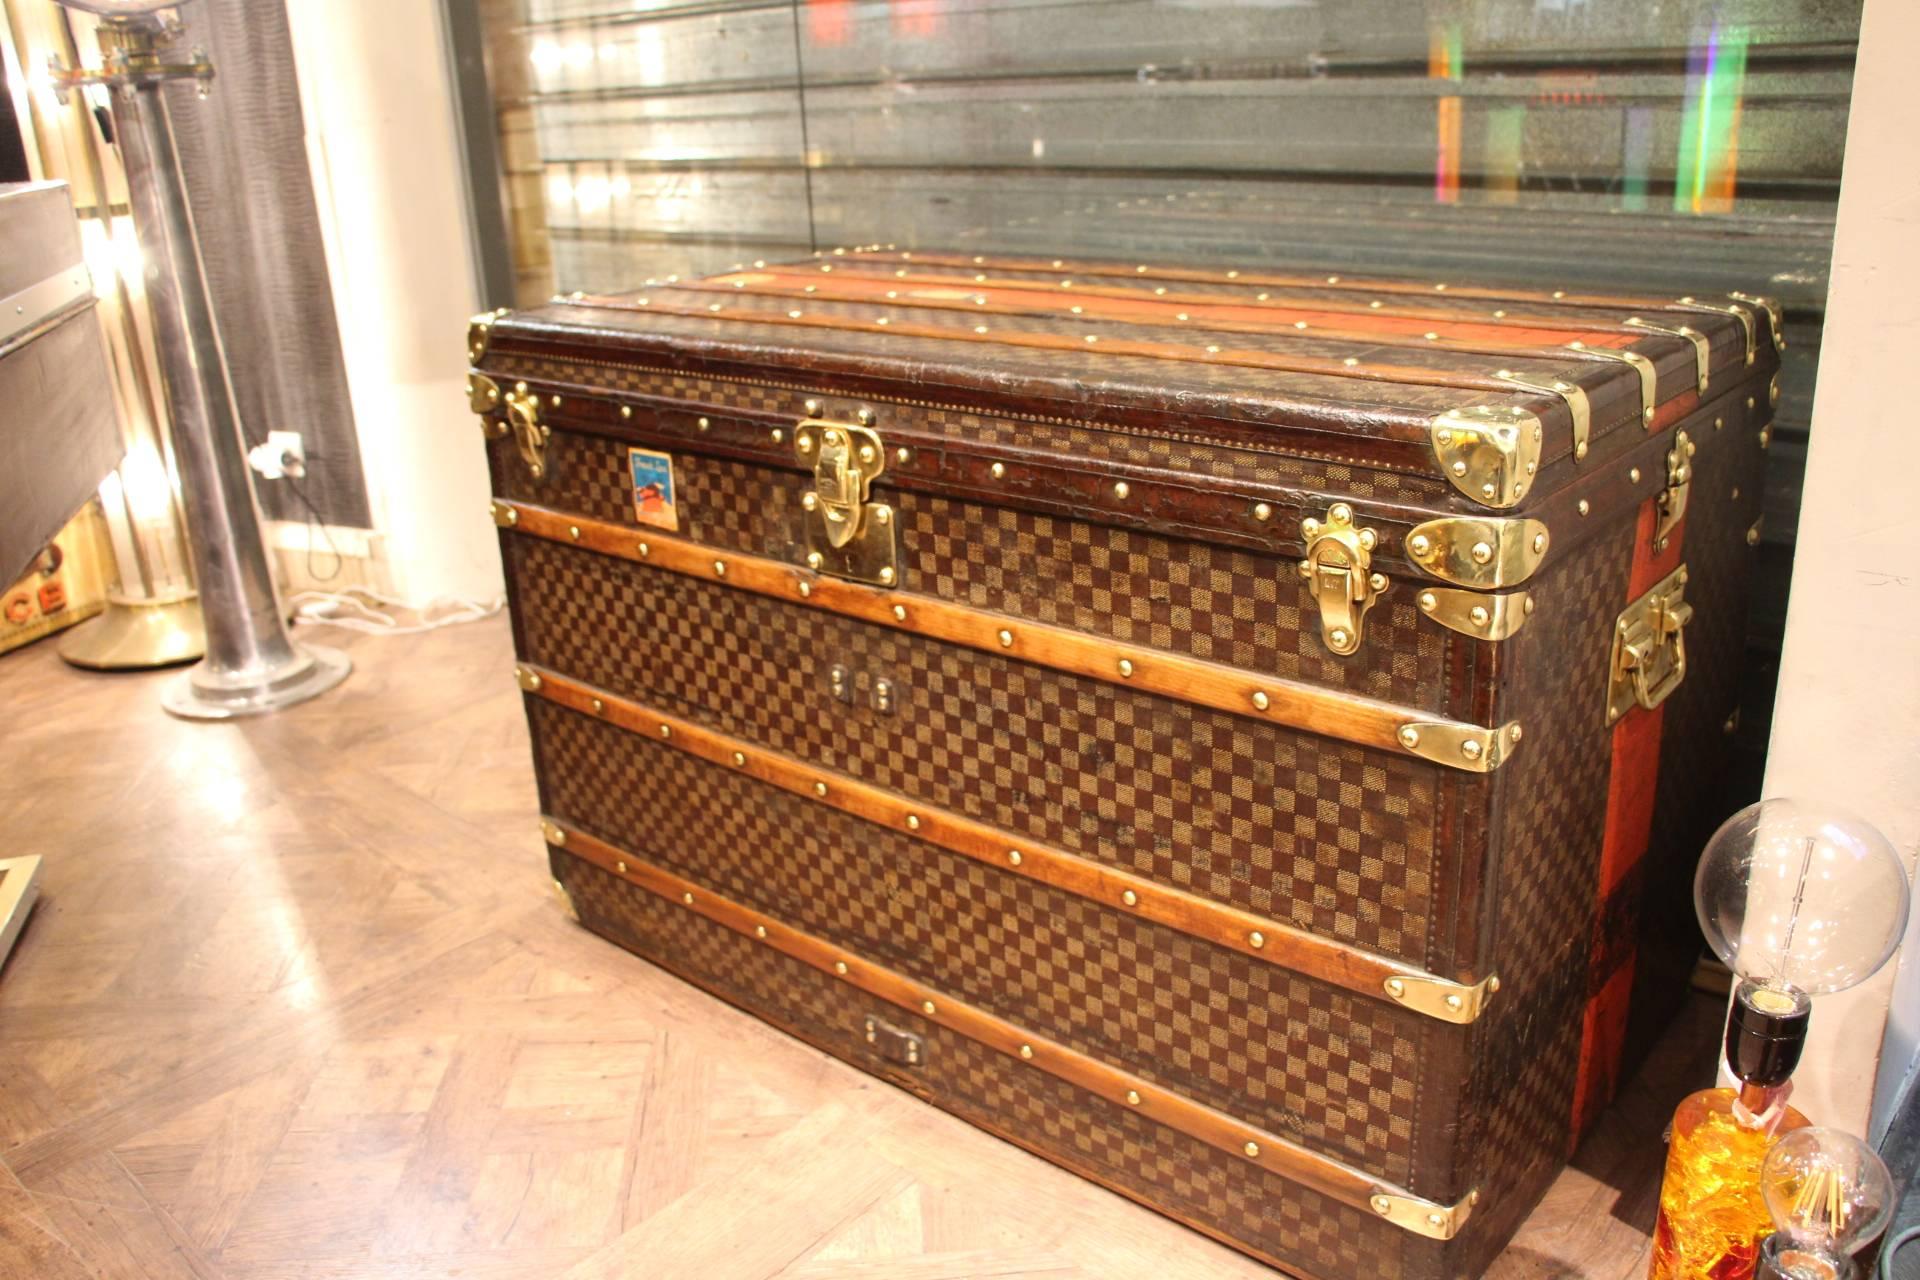 This spectacular Louis Vuitton steamer trunk features the very sought after checker pattern canvas, leather trim and all stamped brass fittings: Locks, clasps, side handles and studs. It is a genuine top of the range piece.
It has got a red painted